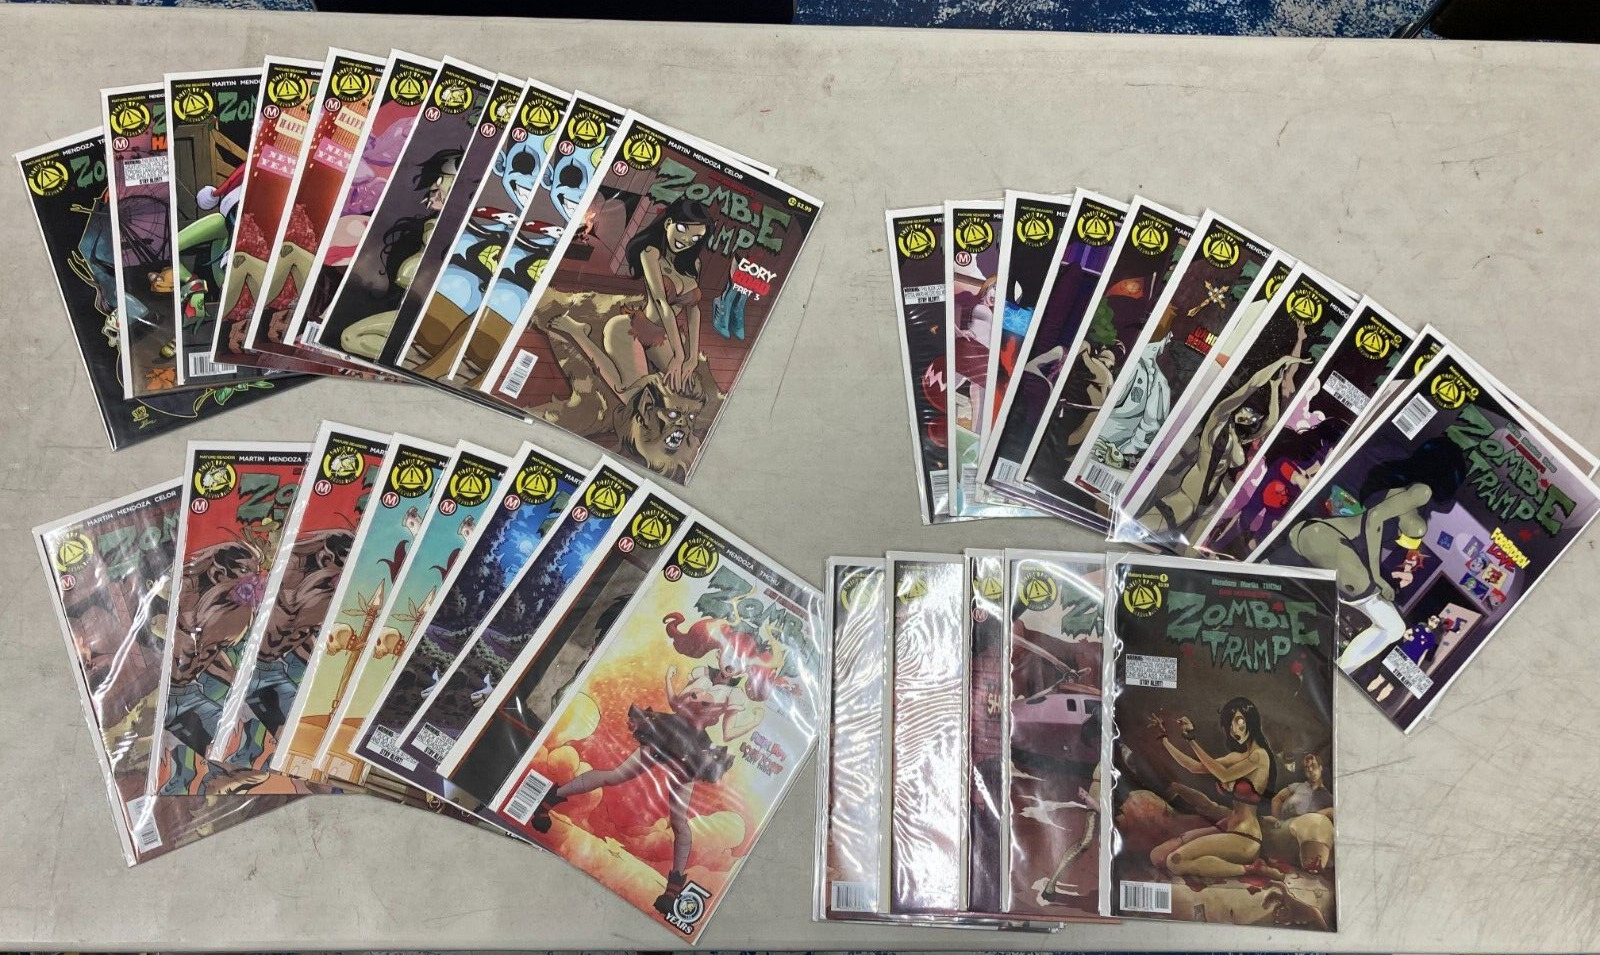 Zombie Tramp 37 issue lot. Includes variants